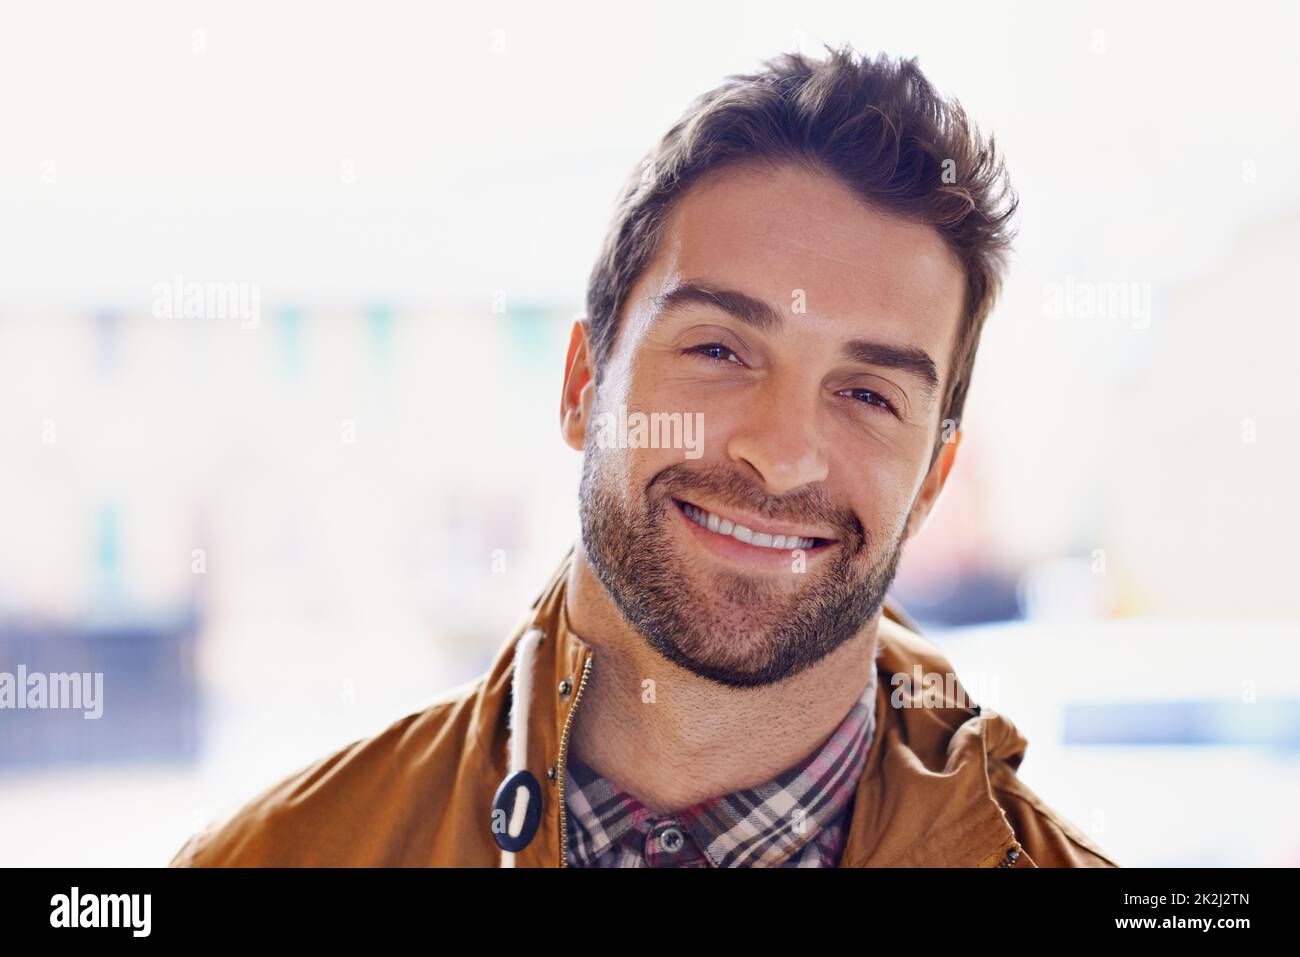 Casual and content. Cropped portrait of a handsome young man. Stock Photo